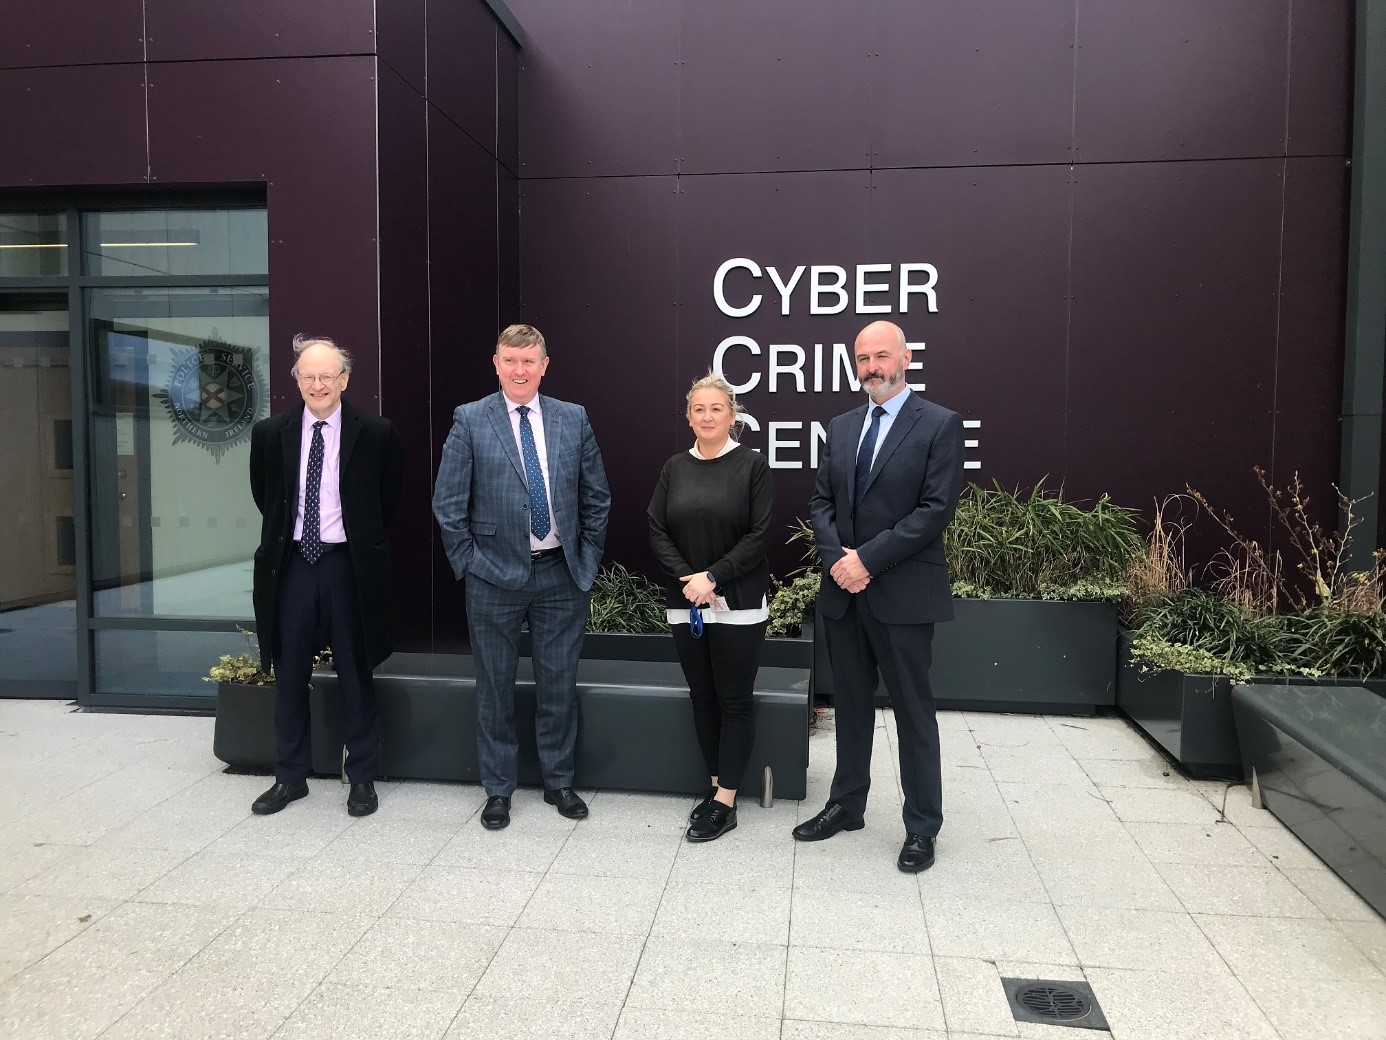 Justice Committee Members pictured outside of the PSNI Cybercrime Centre.